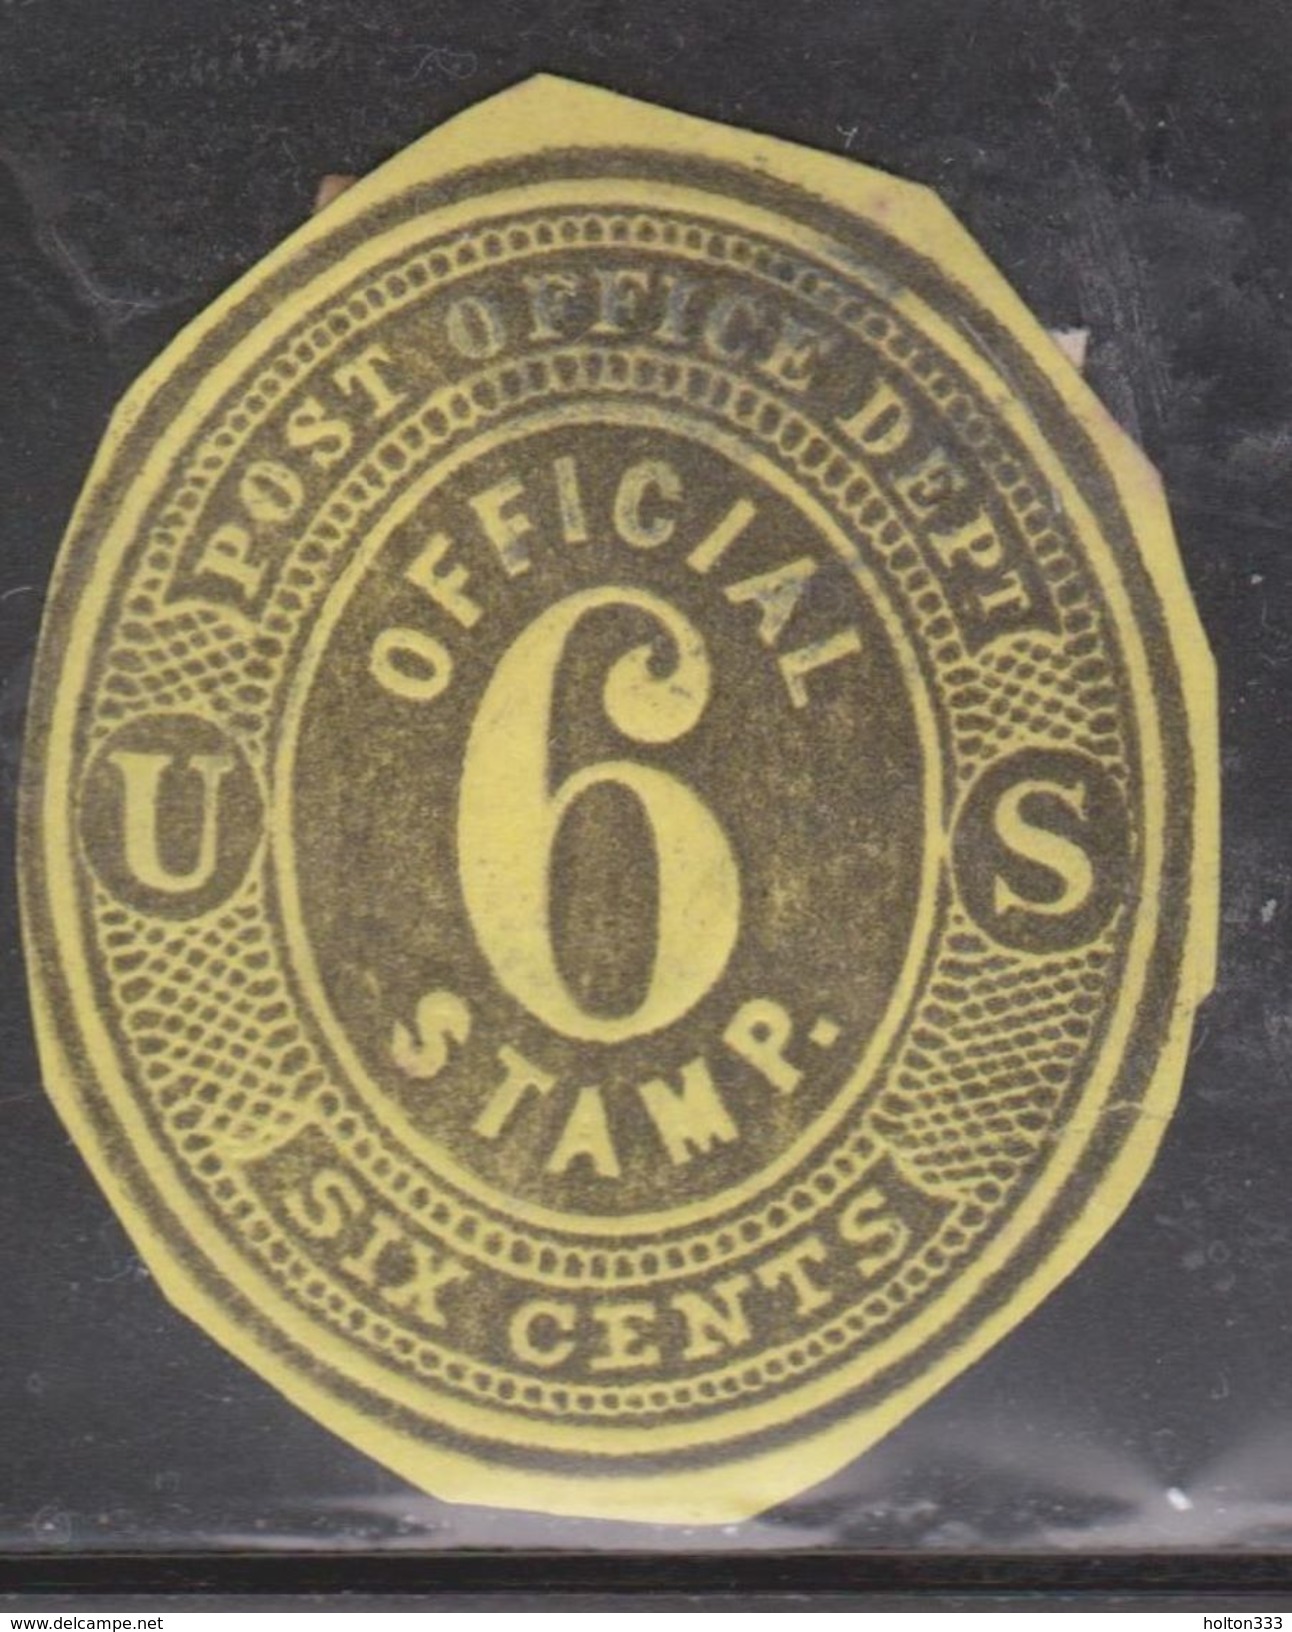 UNITED STATES Scott # UO12 Used - Post Office Department Cut Square - Officials